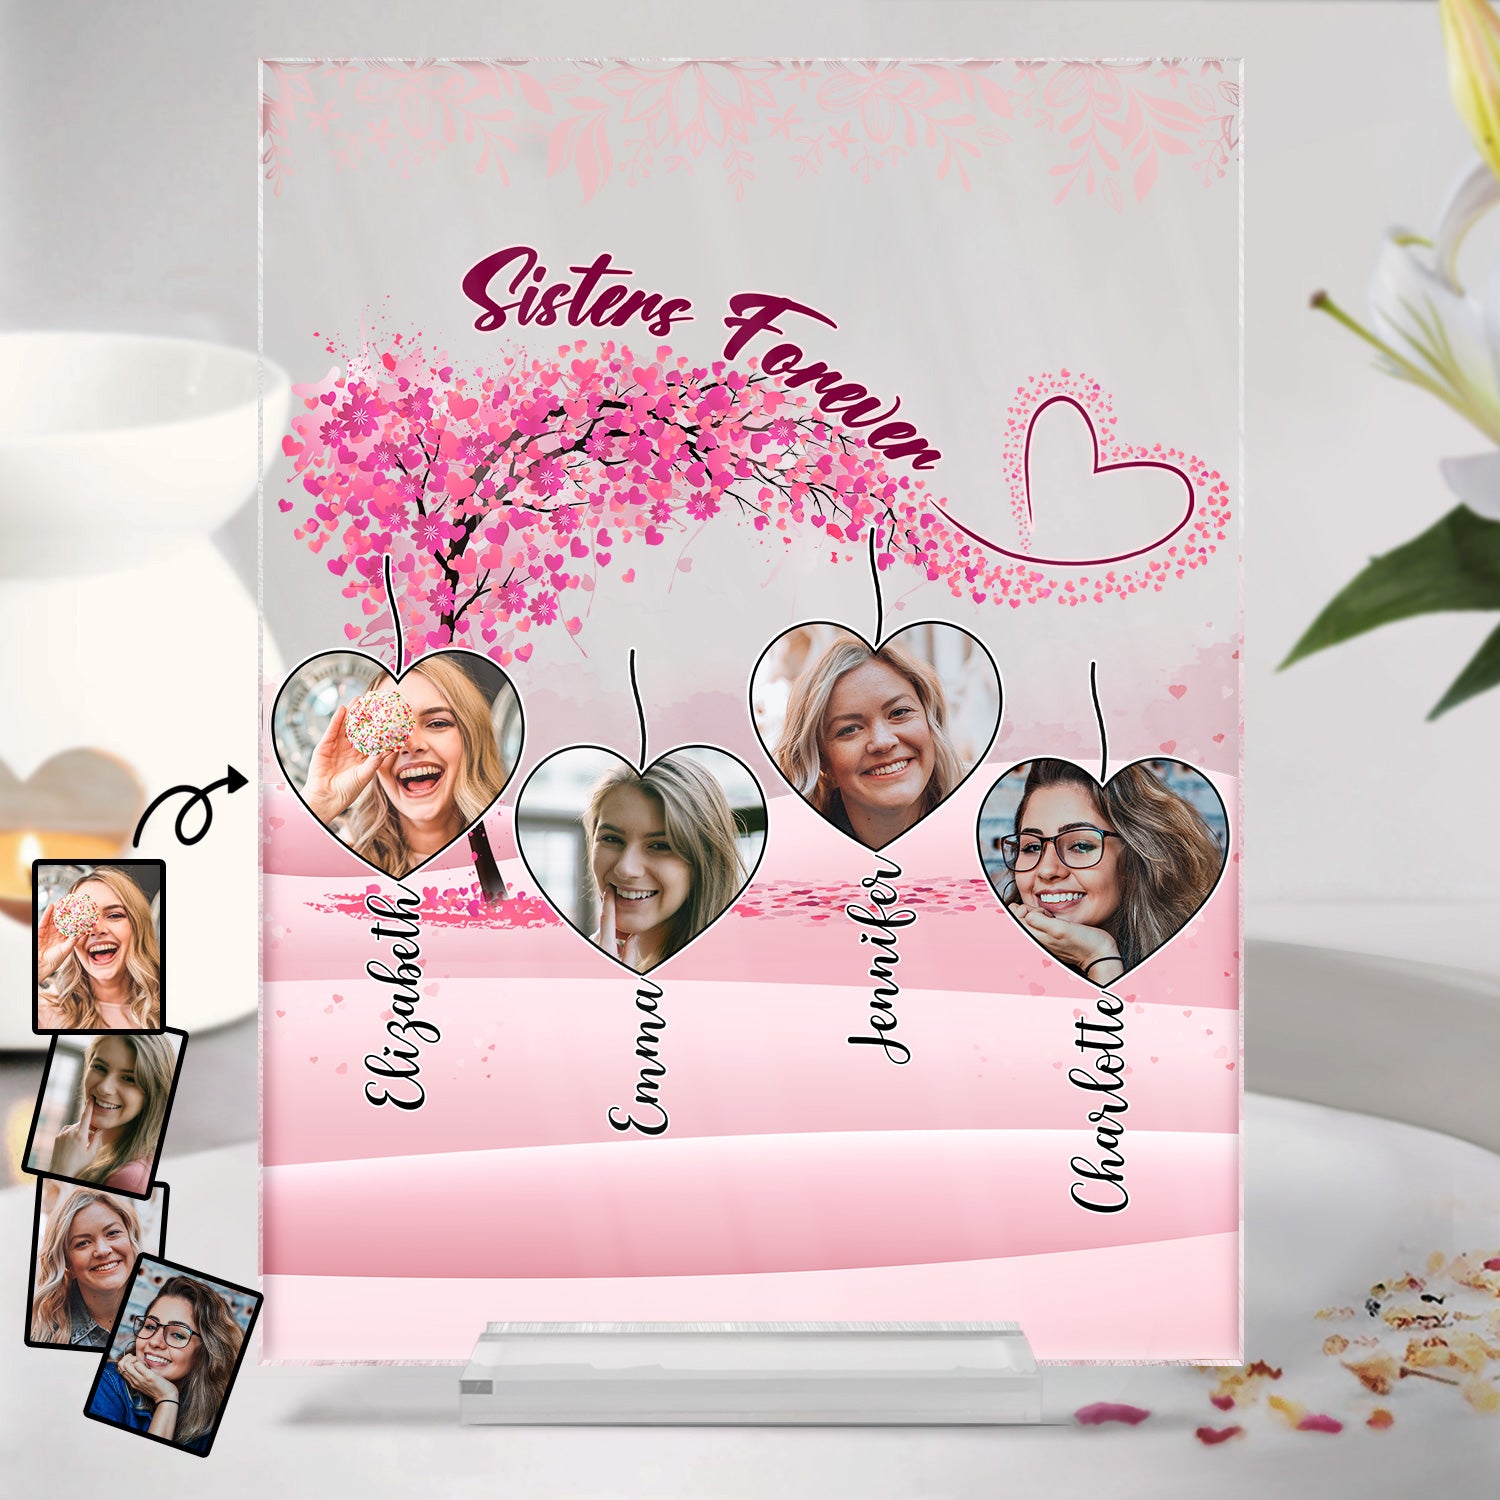 Custom Photo Besties Sisters Forever - Gift For Colleagues, Brothers, Siblings, Best Friends - Personalized Vertical Rectangle Acrylic Plaque